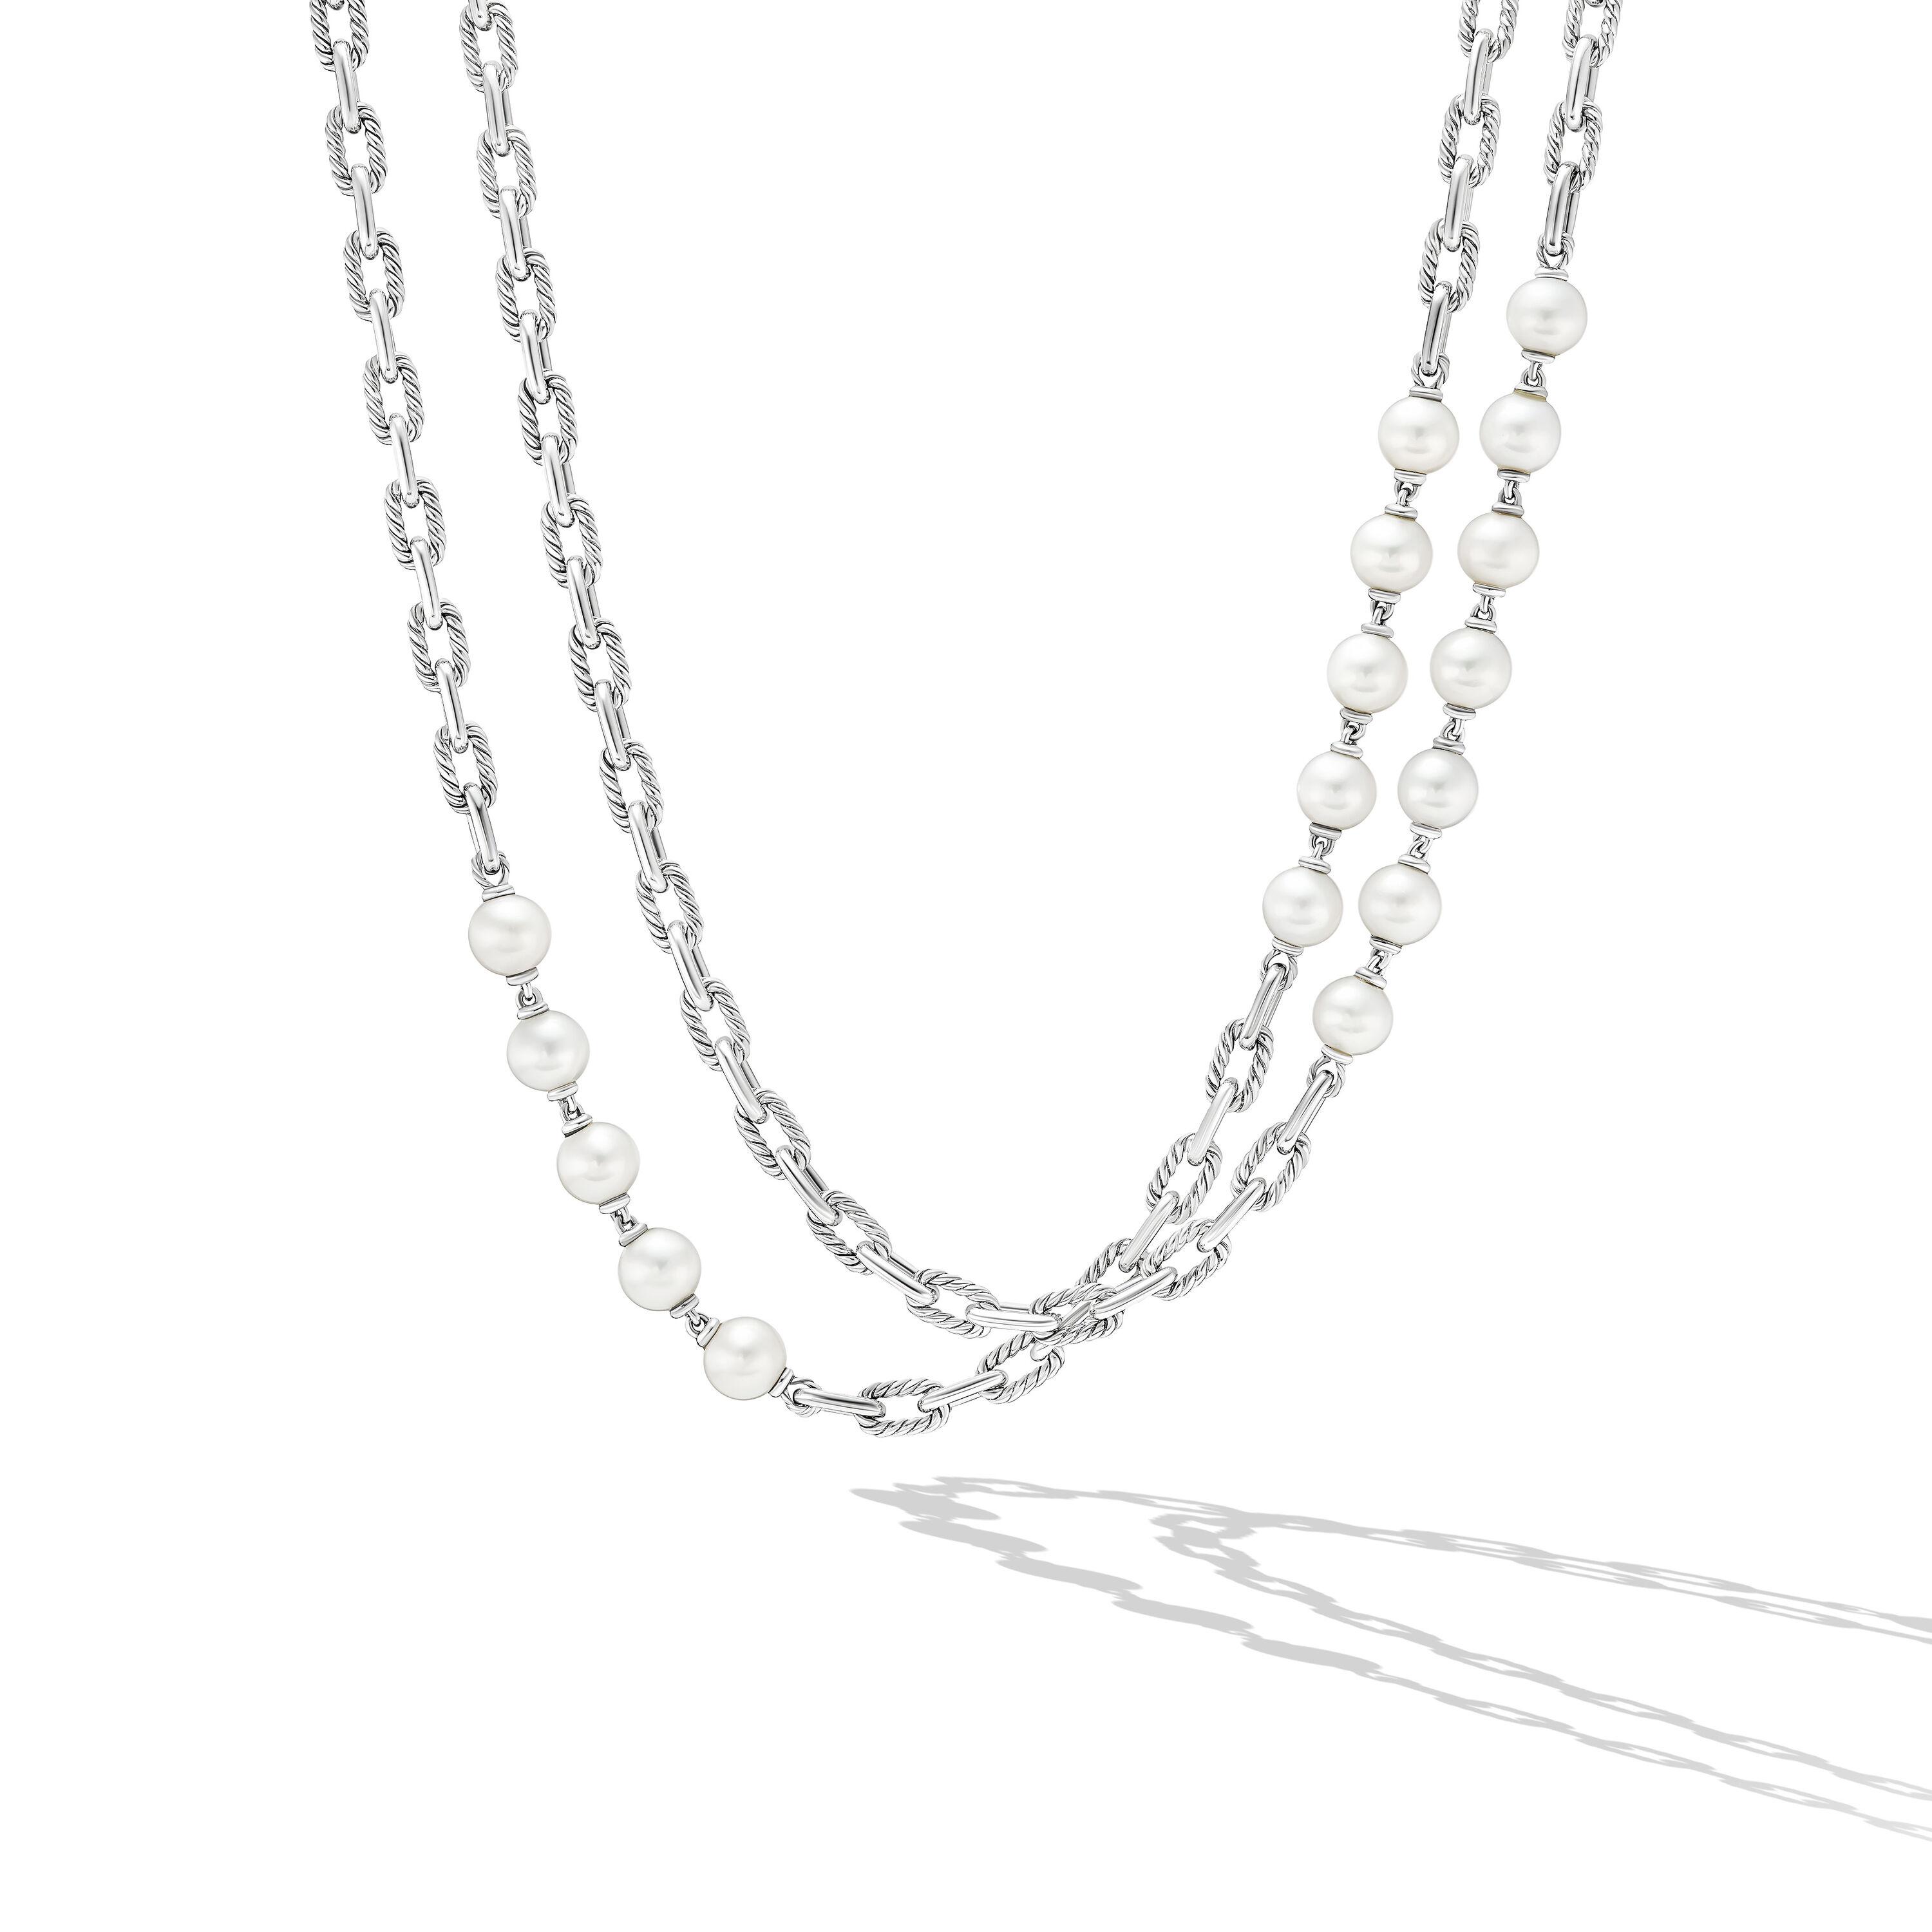 David Yurman Men's Madison Chain Necklace with Pearls